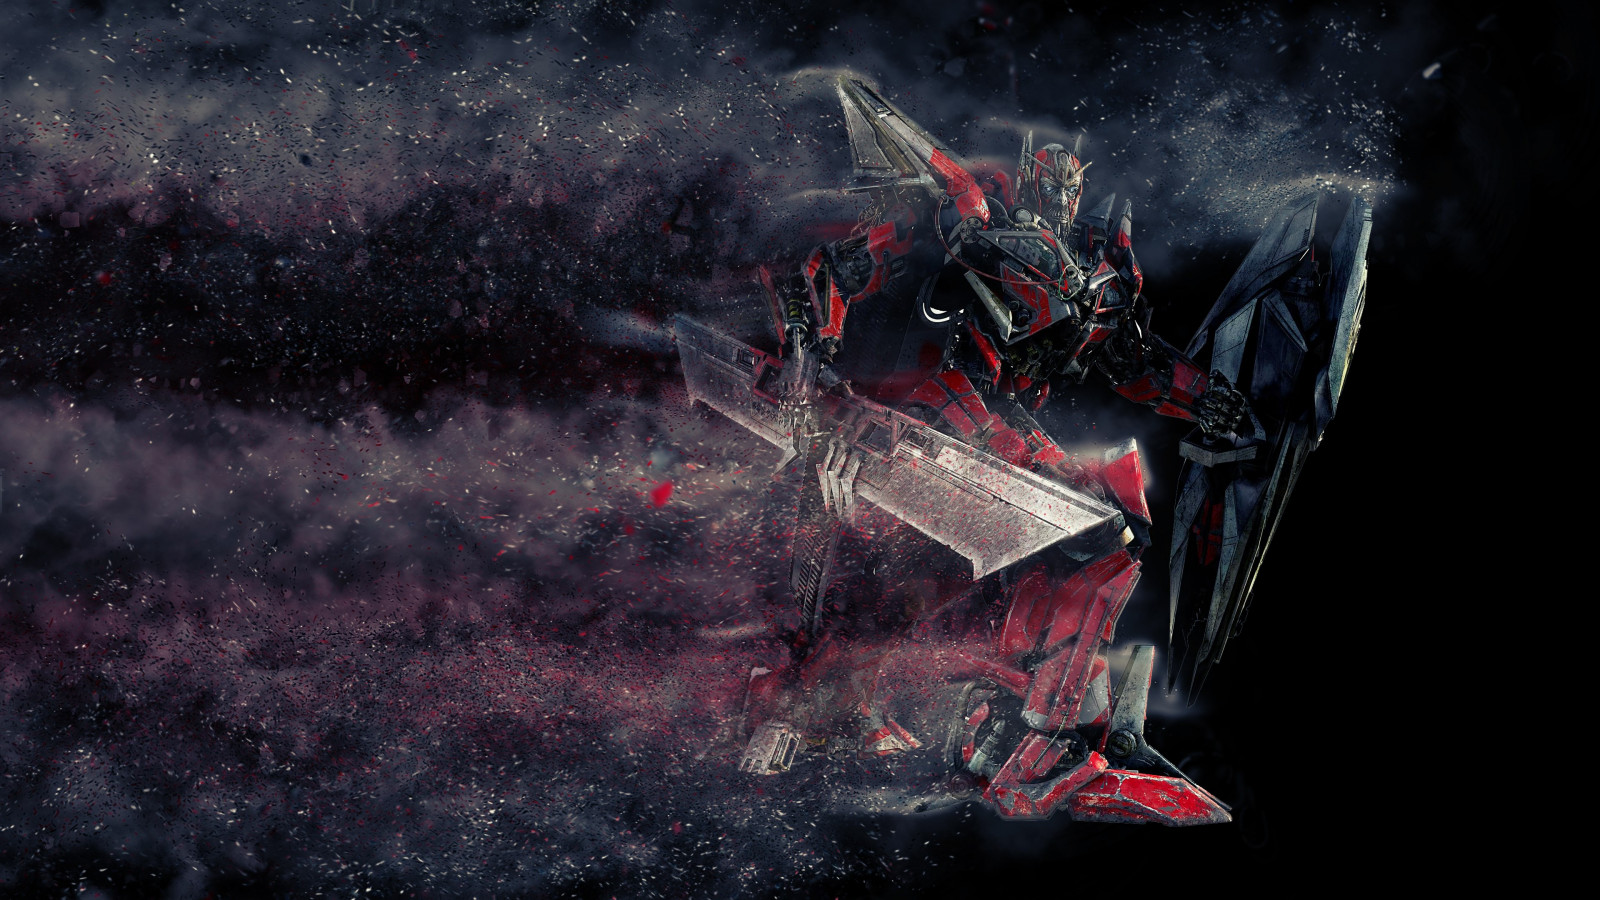 Sentinel Prime from Transformers wallpaper 1600x900